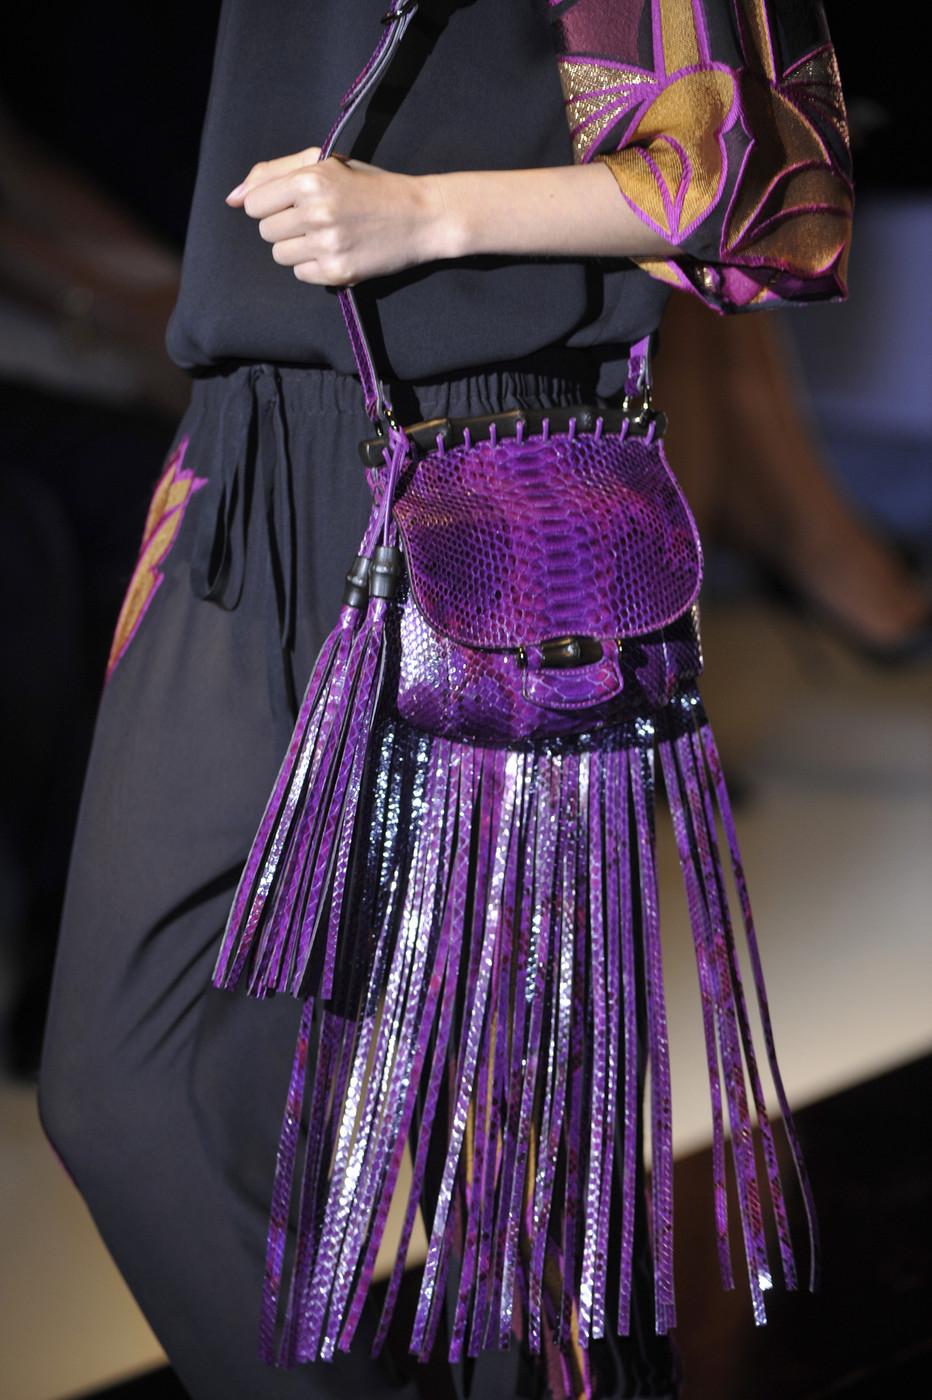 New Gucci Nouveau Python Fringe Bamboo Runway Bag in Plum $3100 10